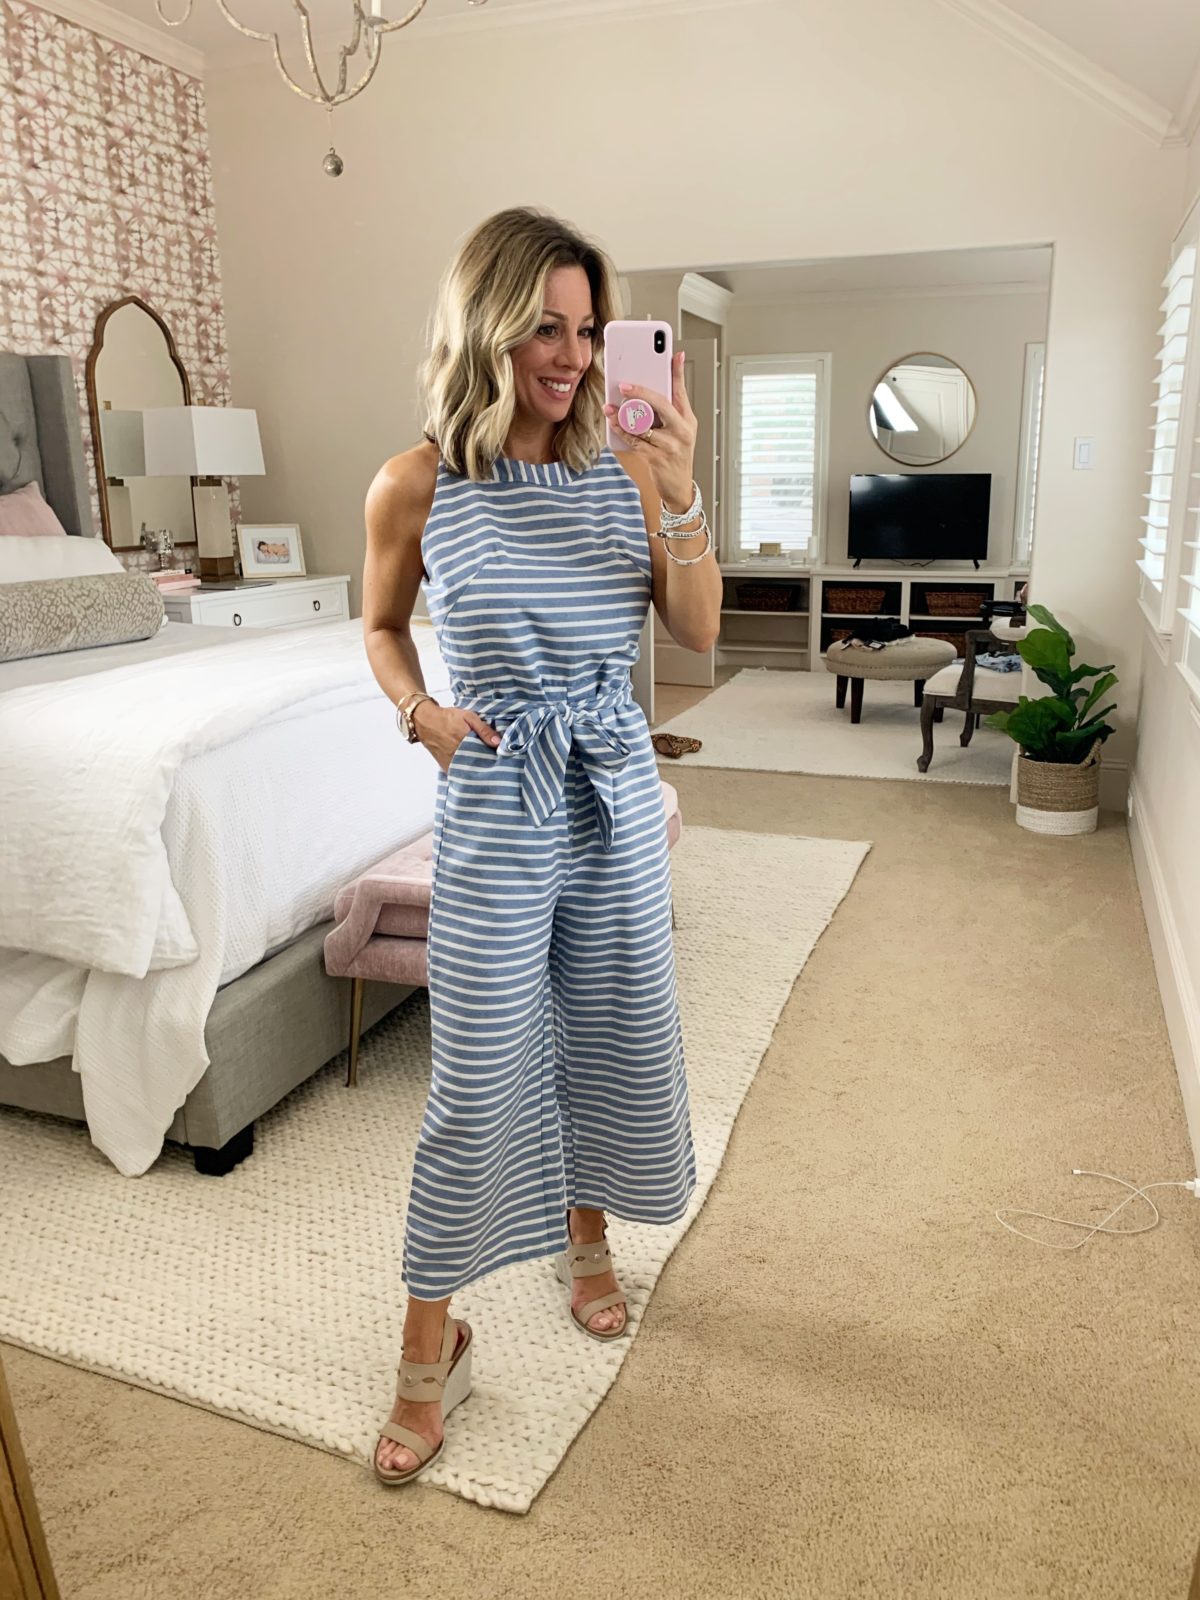 Blue and White Stripe Jumpsuit, Wedge Sandals